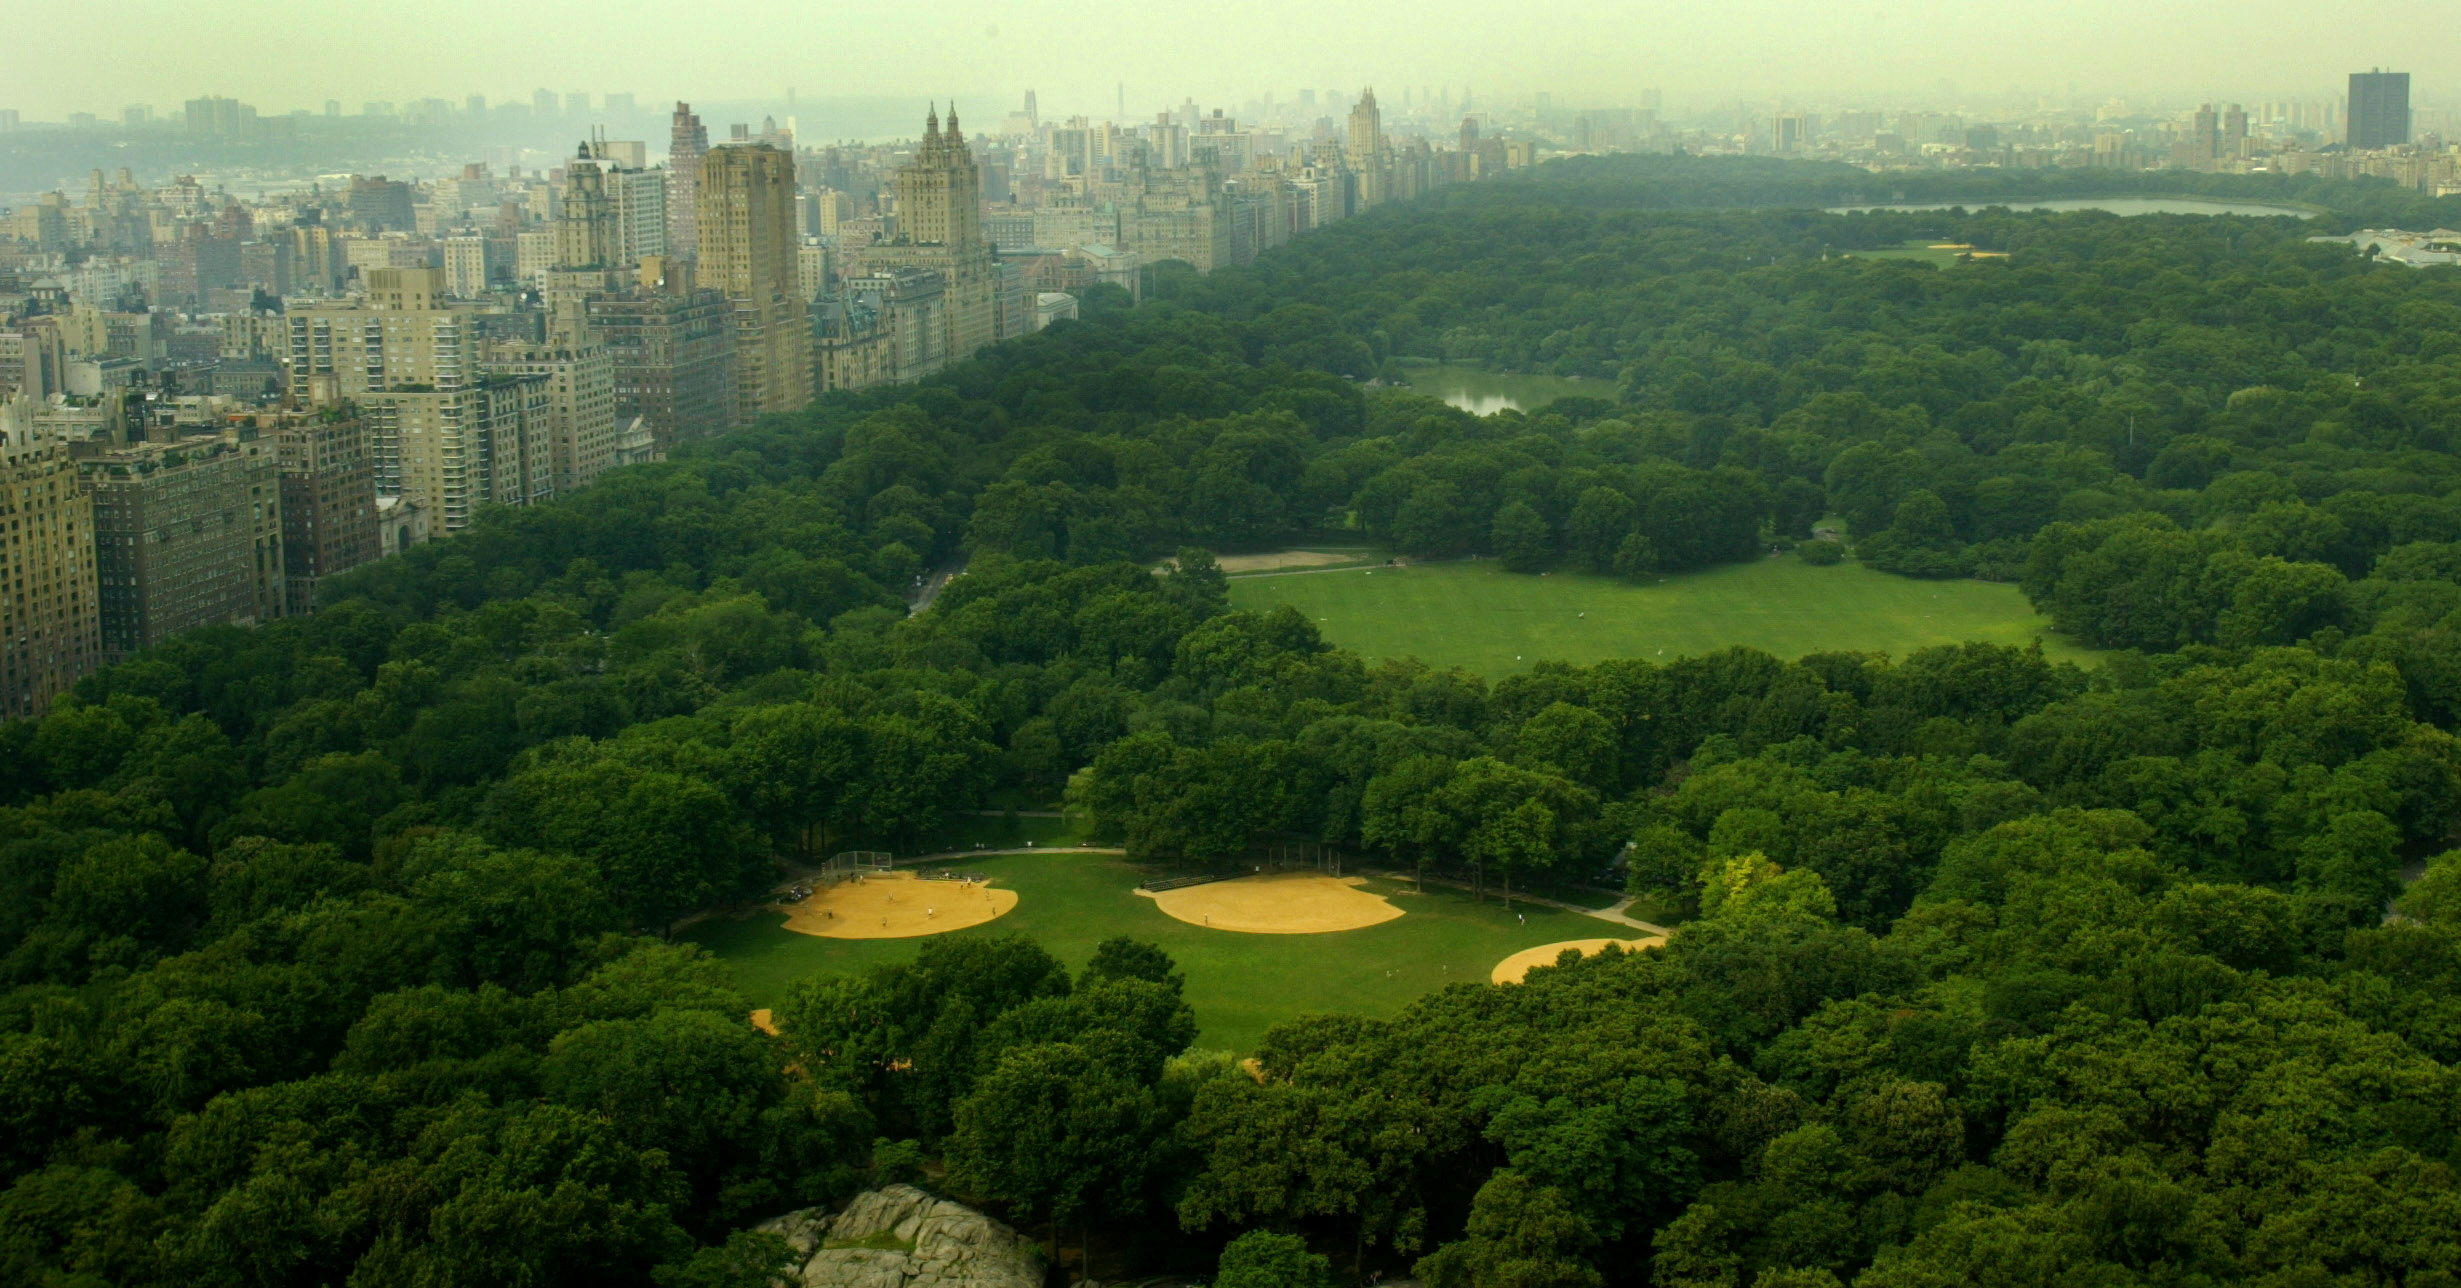 CENTRAL PARK AS SEEN FROM CENTRAL PARK SOUTH